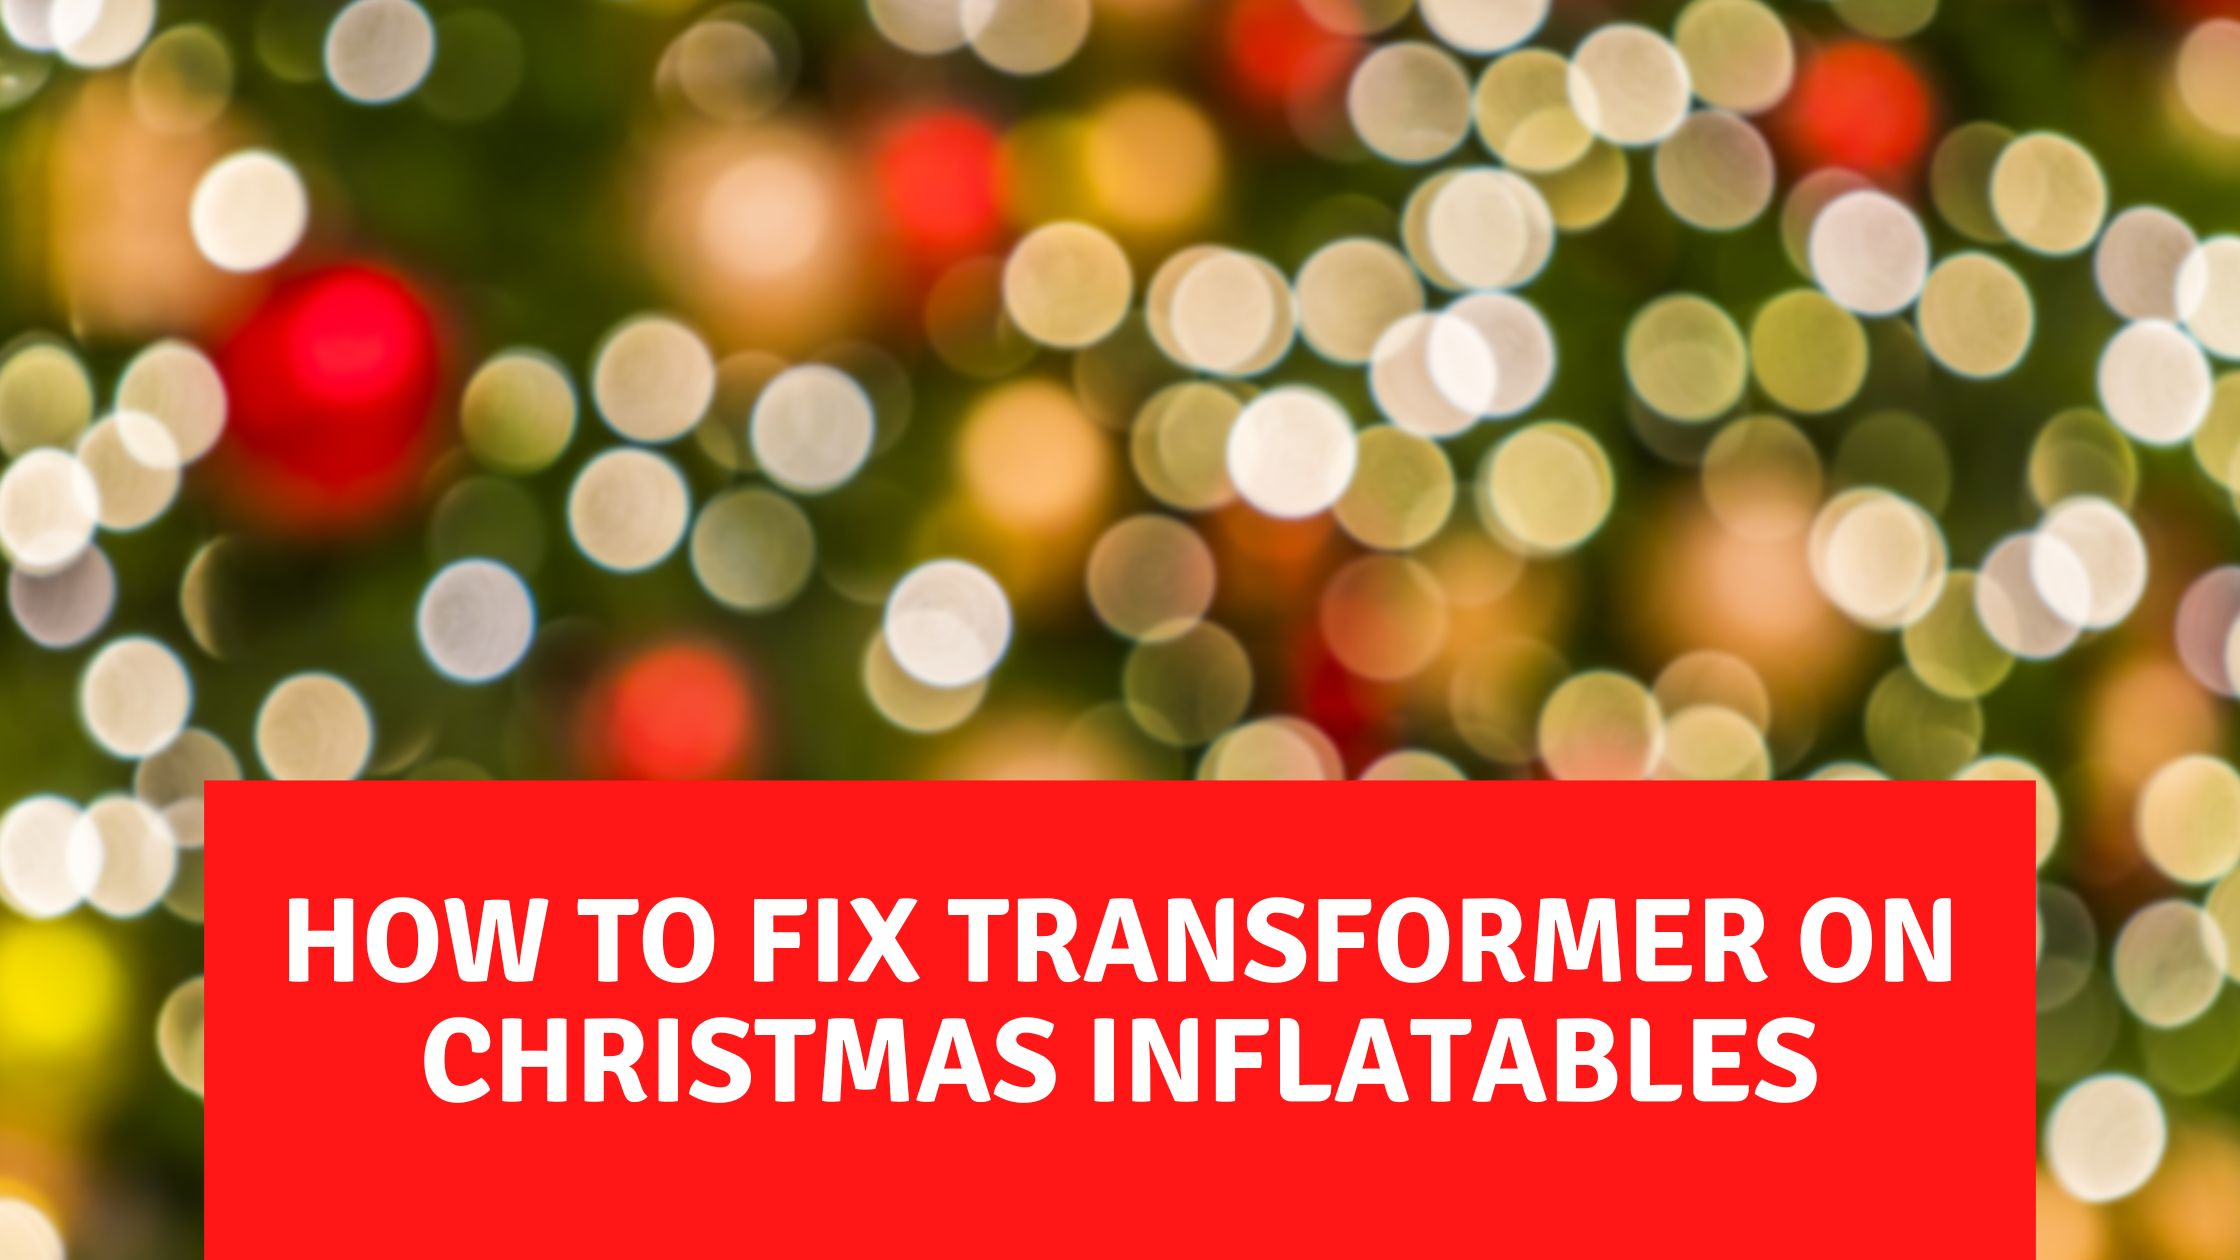 Is your Christmas inflatable not working? Here’s how to fix it!